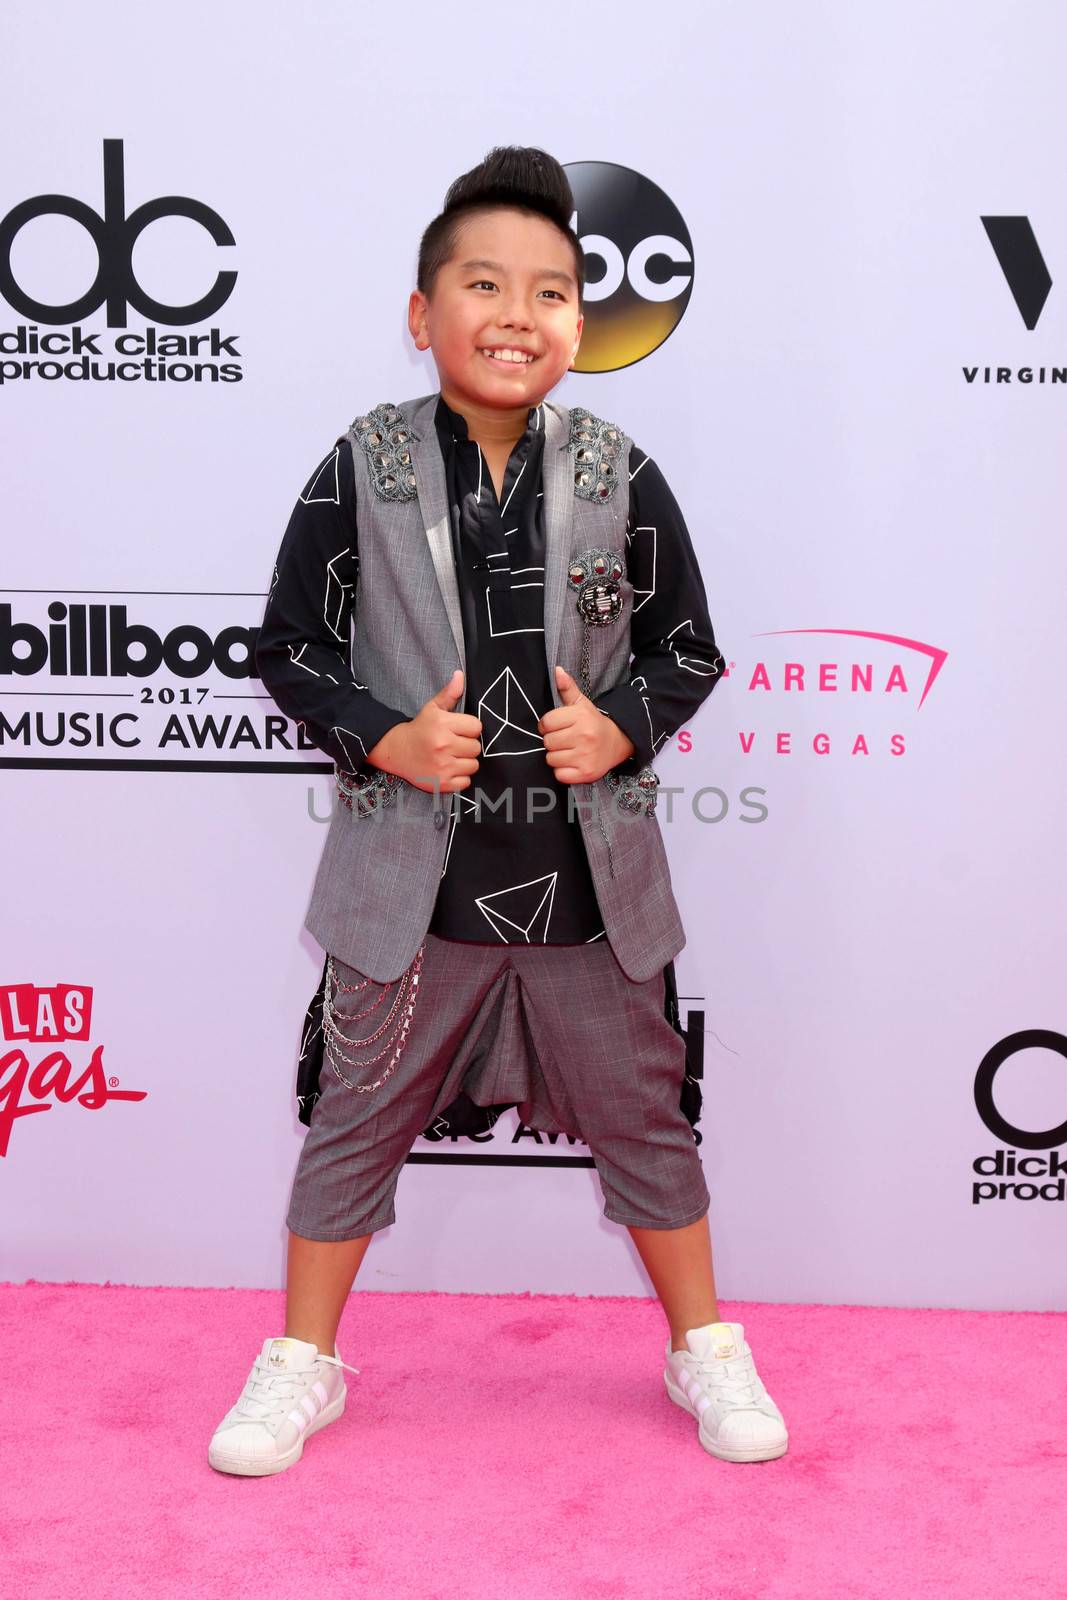 Aidan Prince Xiong
at the 2017 Billboard Awards Arrivals, T-Mobile Arena, Las Vegas, NV 05-21-17/ImageCollect by ImageCollect